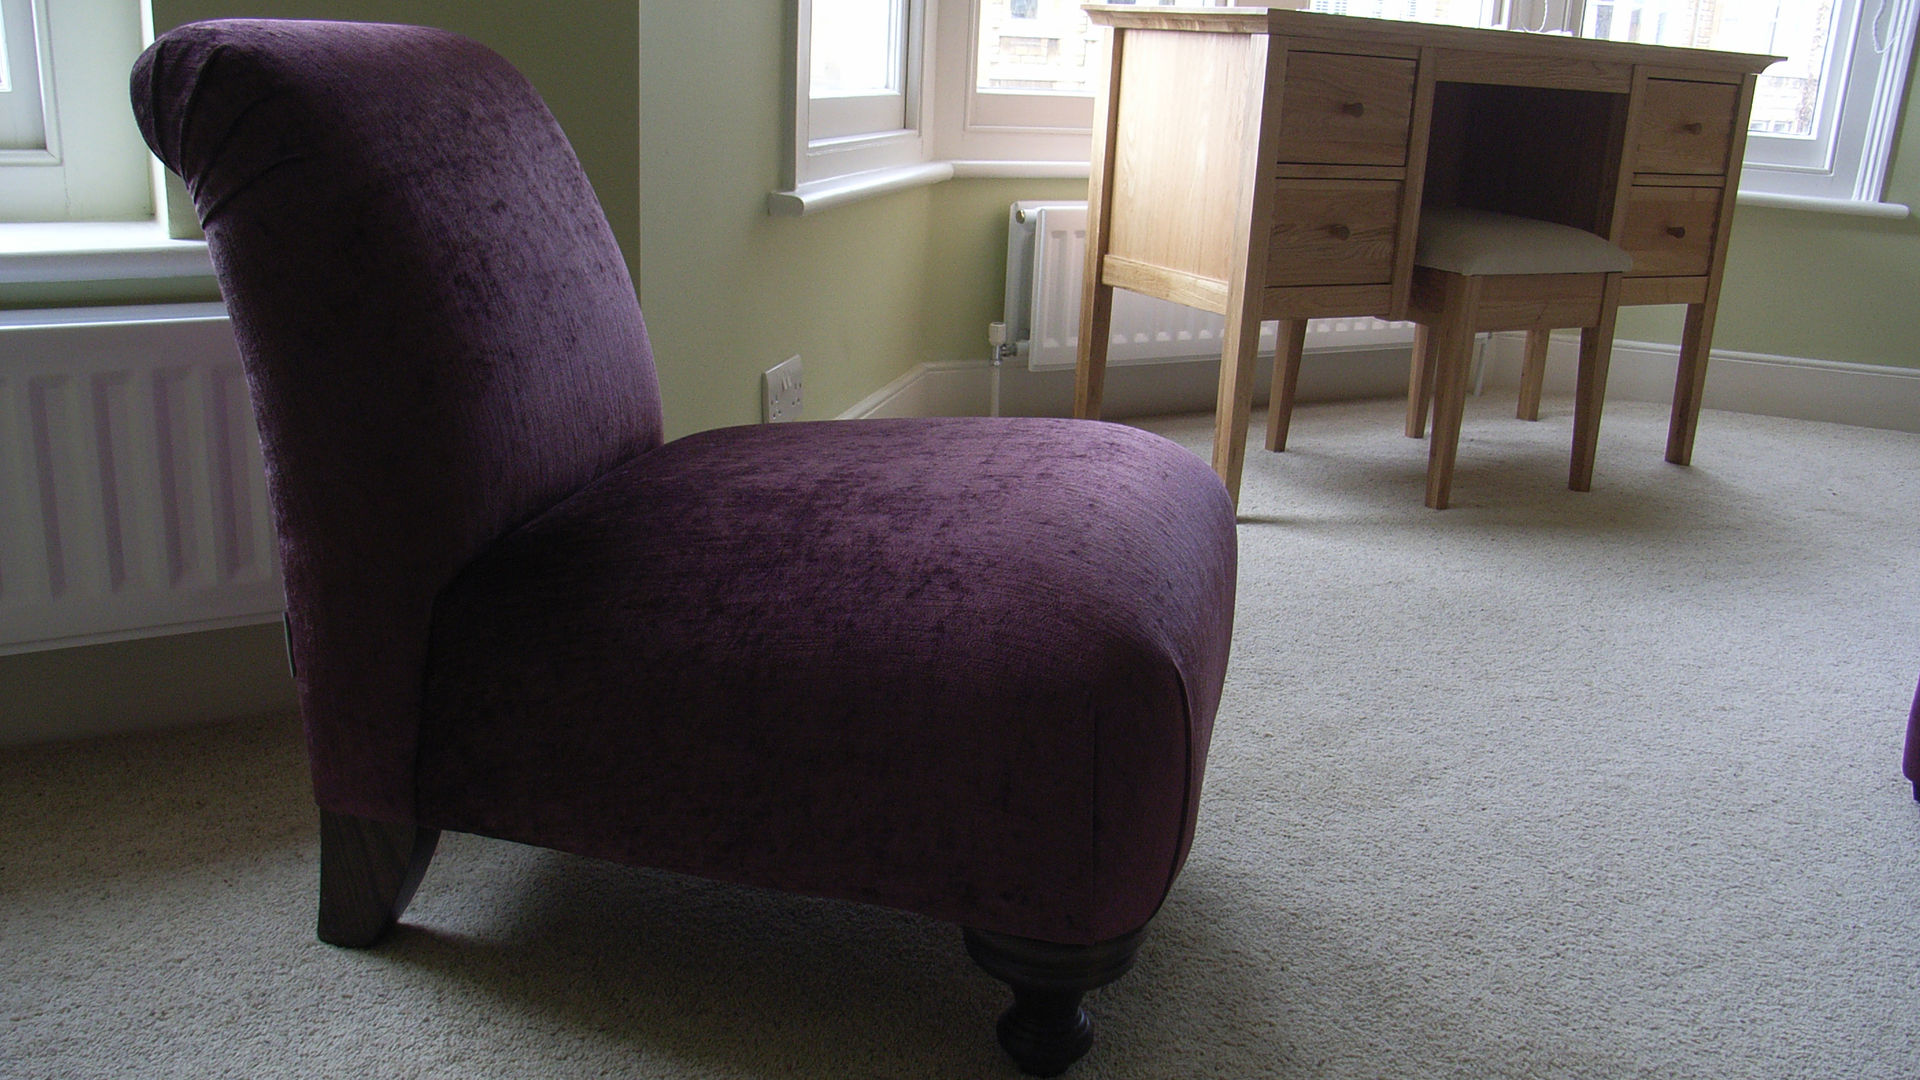 bedroom chair Style Within Quartos clássicos purple bedroom chair,bedroom seating,bedroom carpet